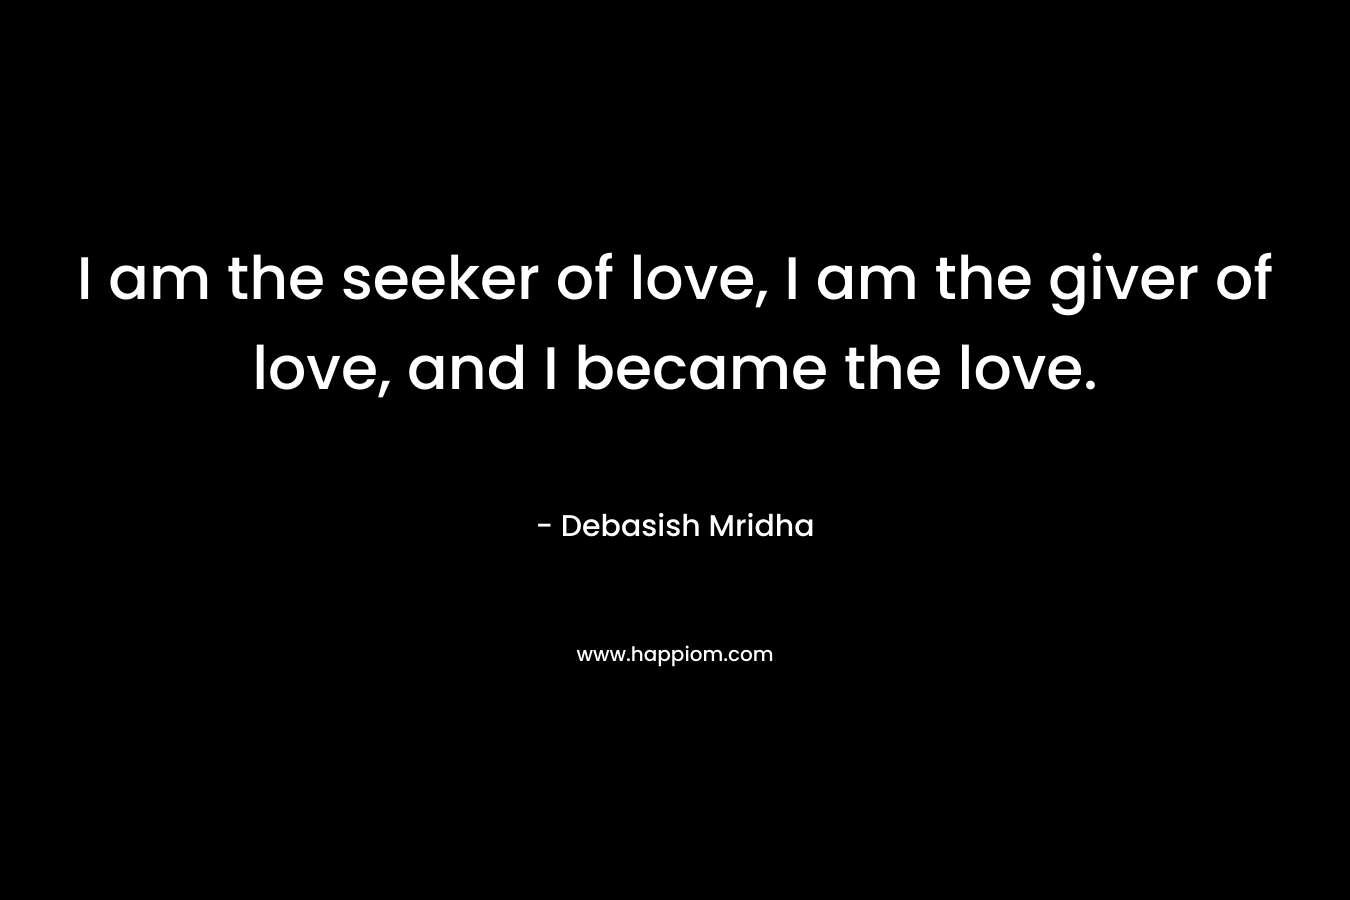 I am the seeker of love, I am the giver of love, and I became the love. – Debasish Mridha